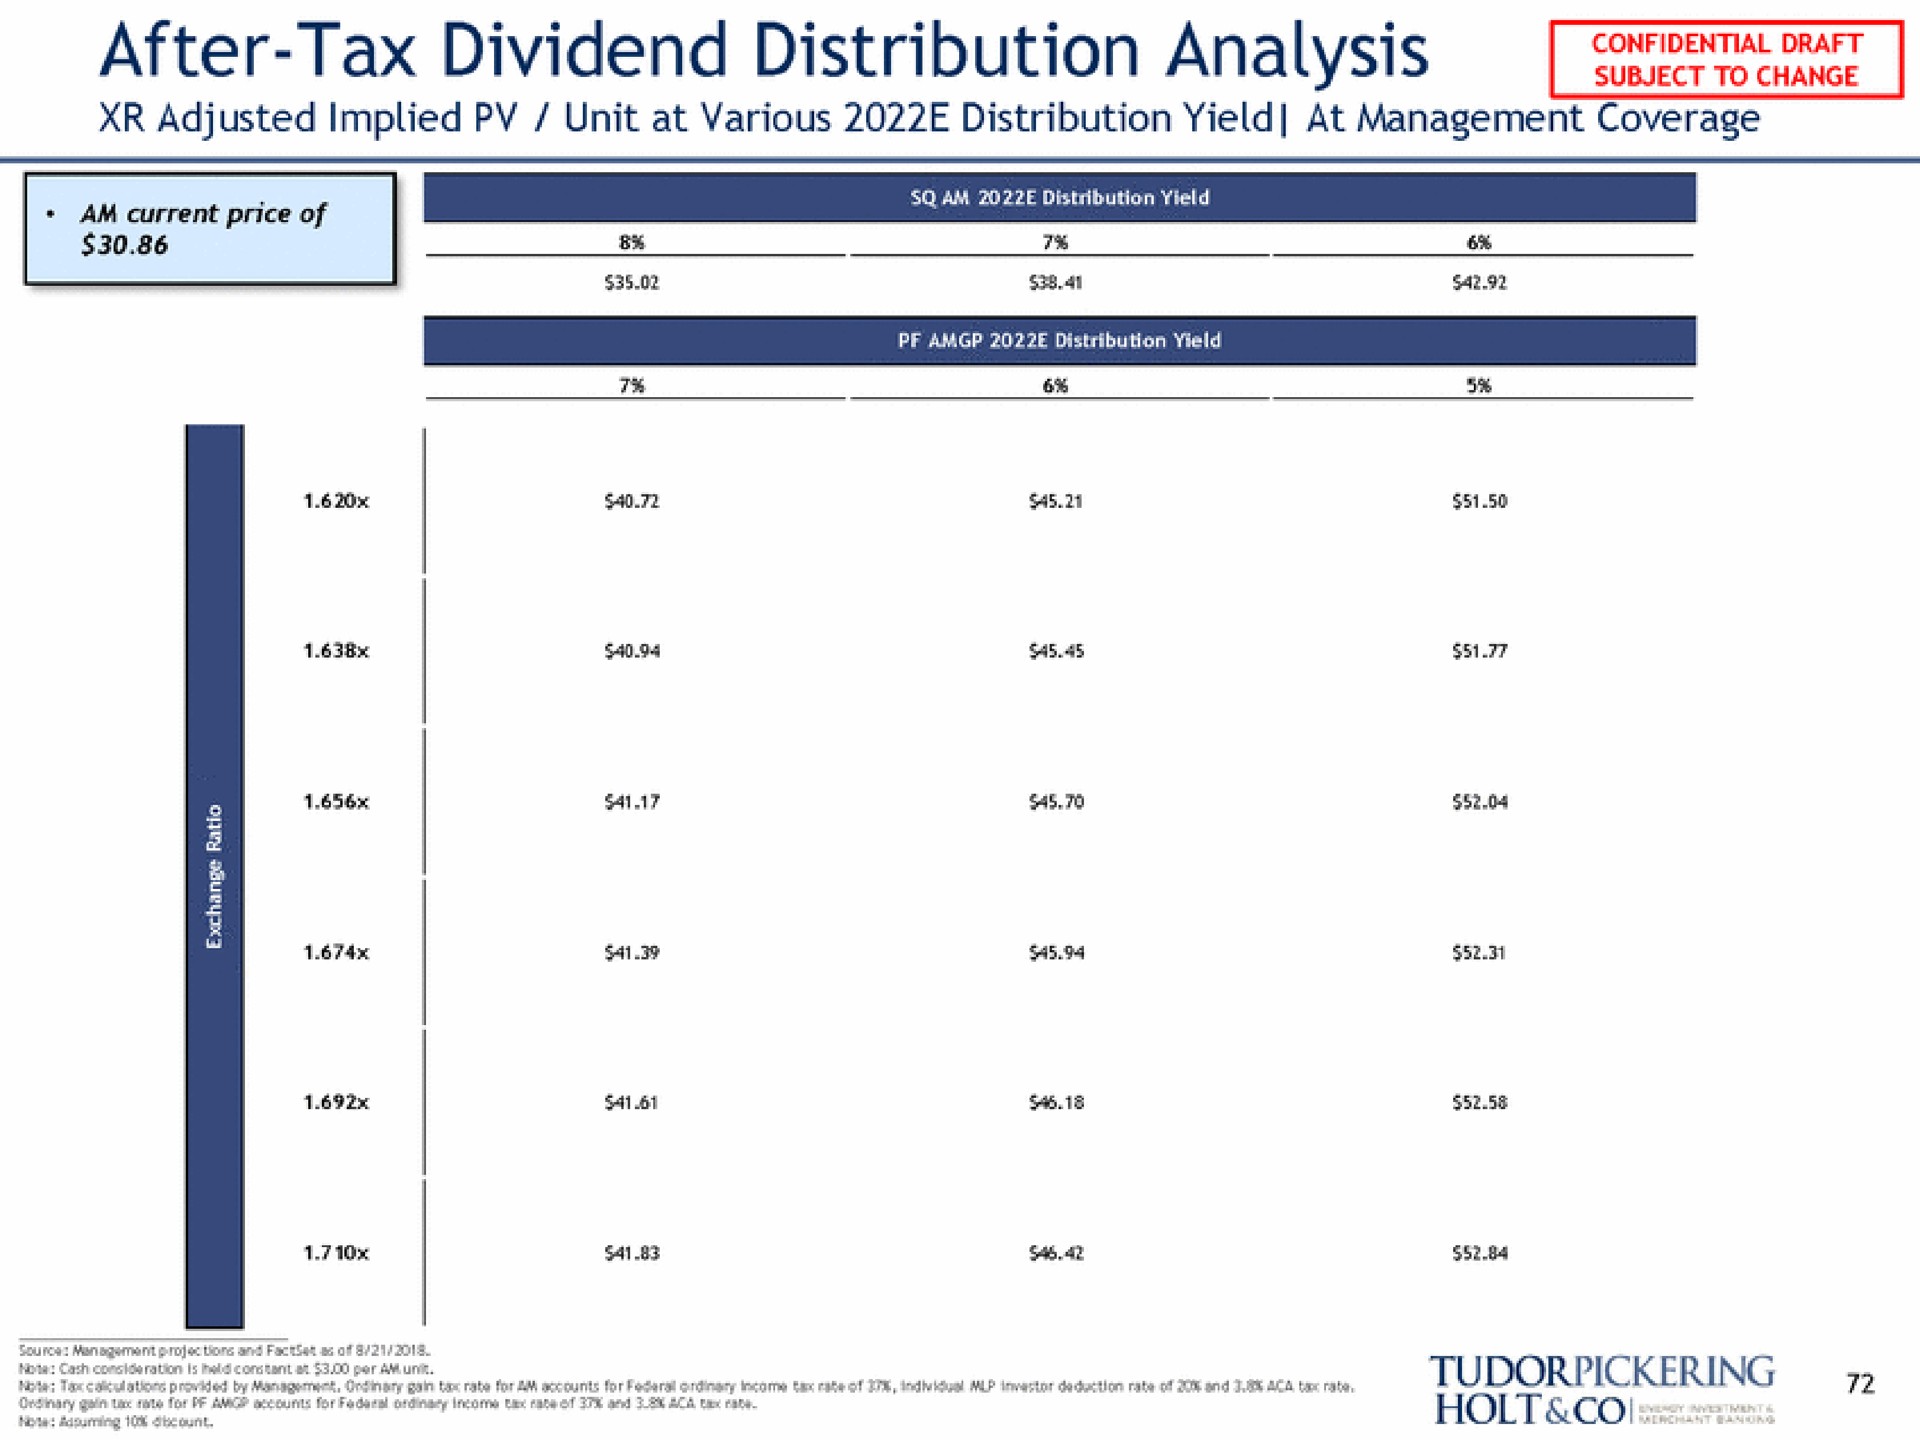 after tax dividend distribution analysis am current price of | Tudor, Pickering, Holt & Co